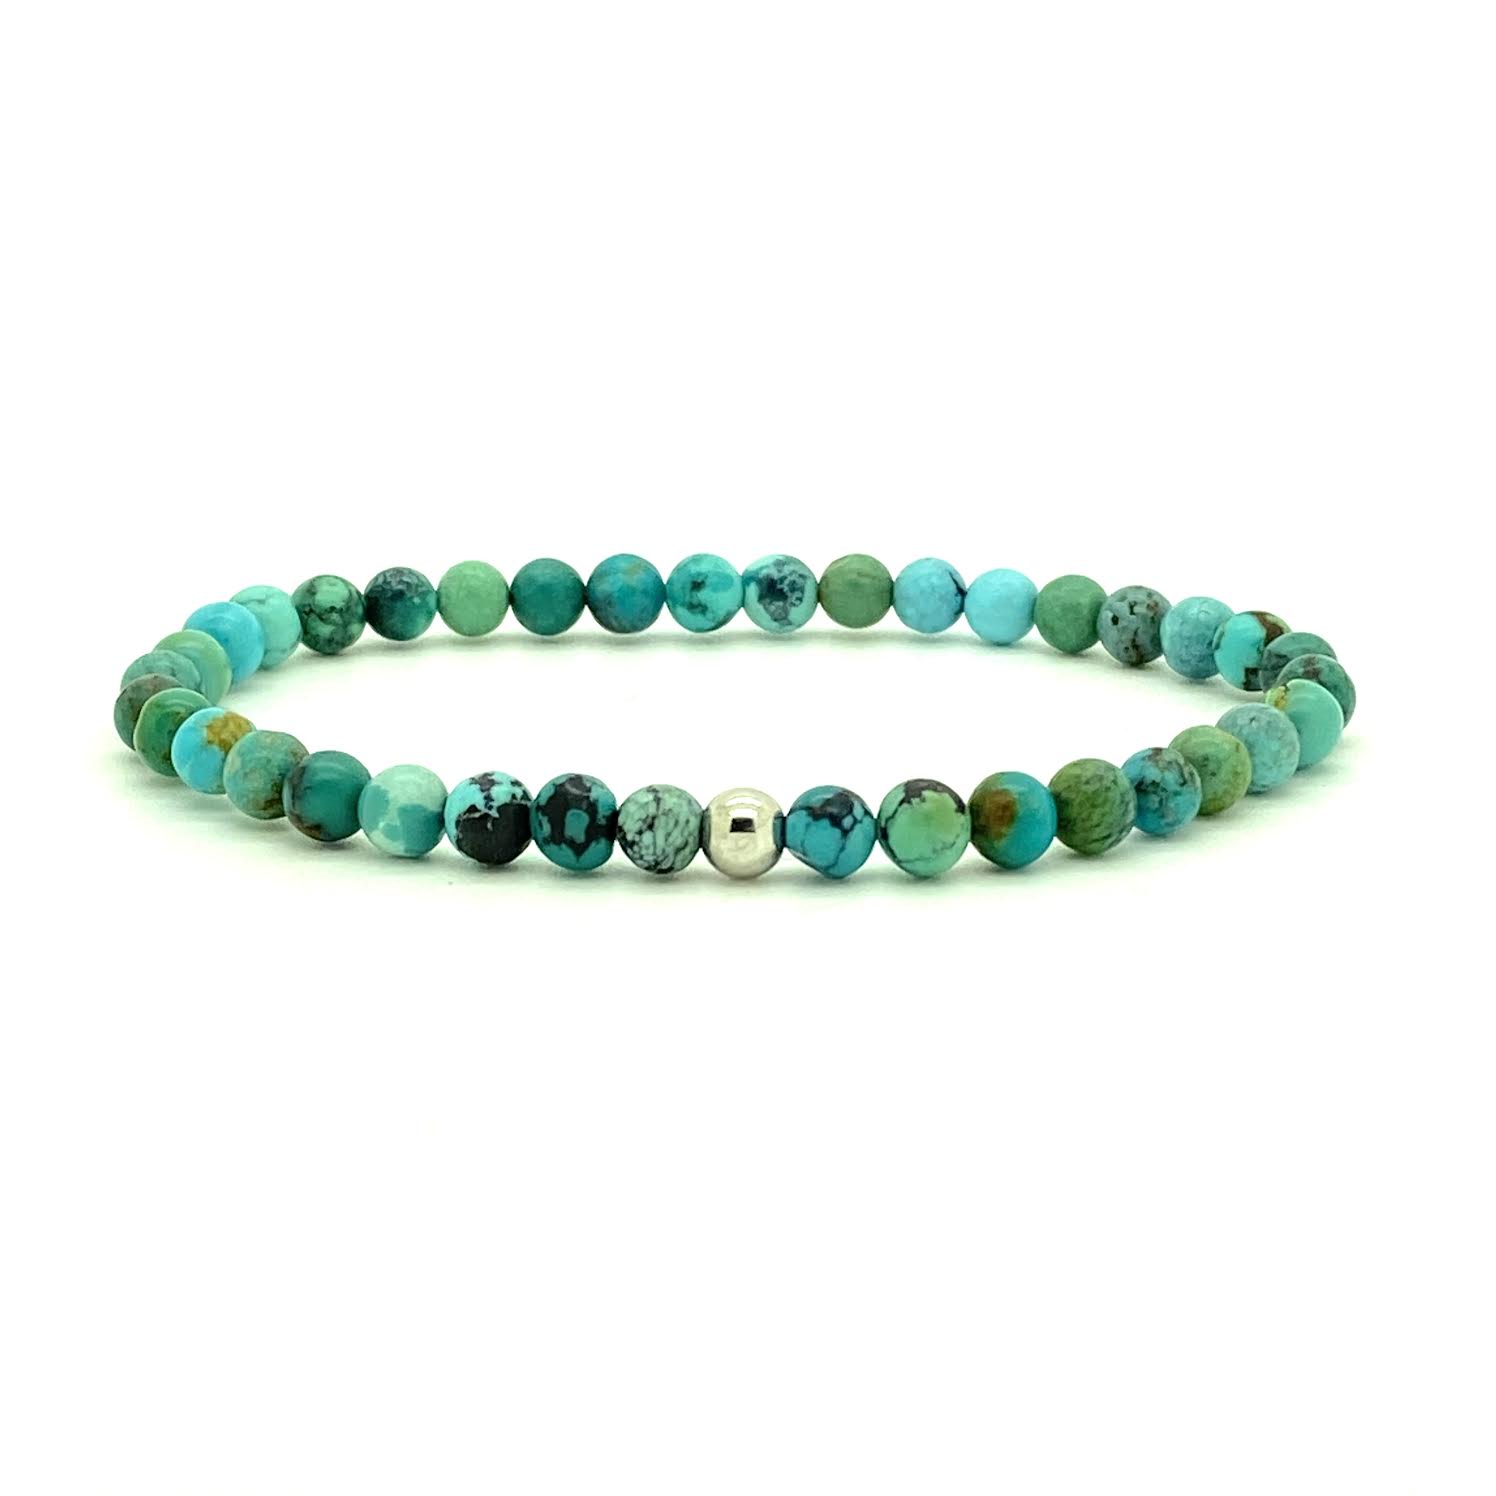 Turquoise represents wisdom, tranquility, protection, good fortune and hope. Round Turquoise Hubei beads paired with your choice of a single 14K solid white, rose or yellow gold bead. Elastic cord for a perfect fit. Made by WristBend